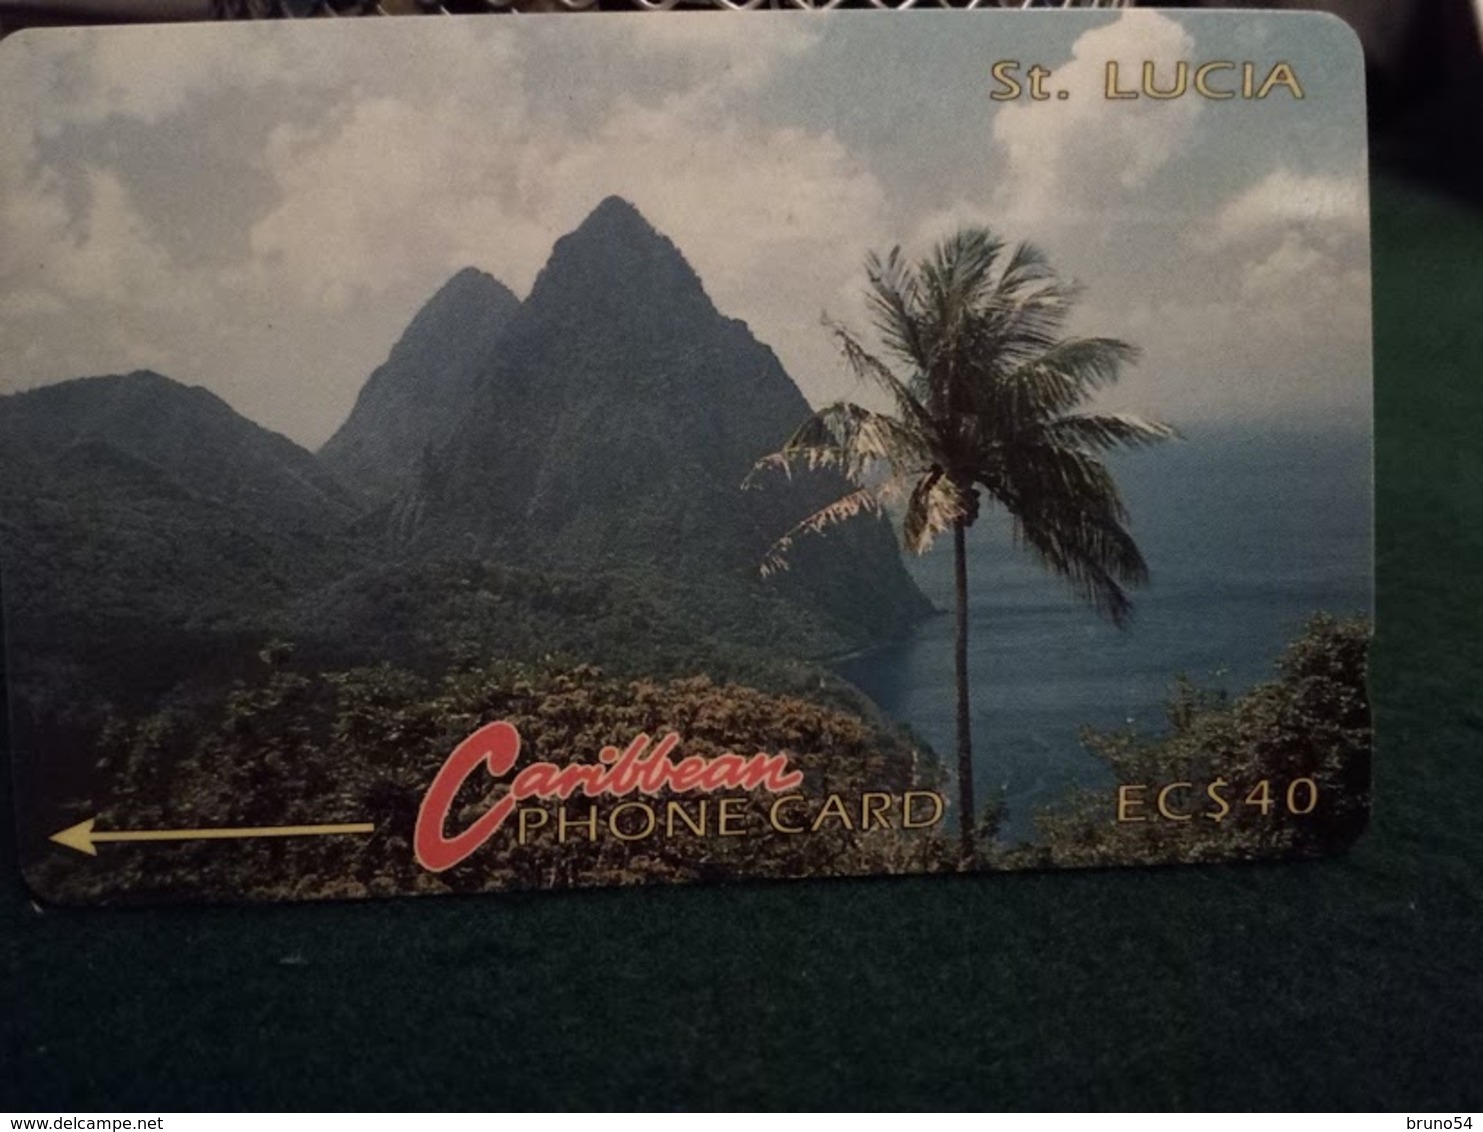 14 different phonecards from St Lucia